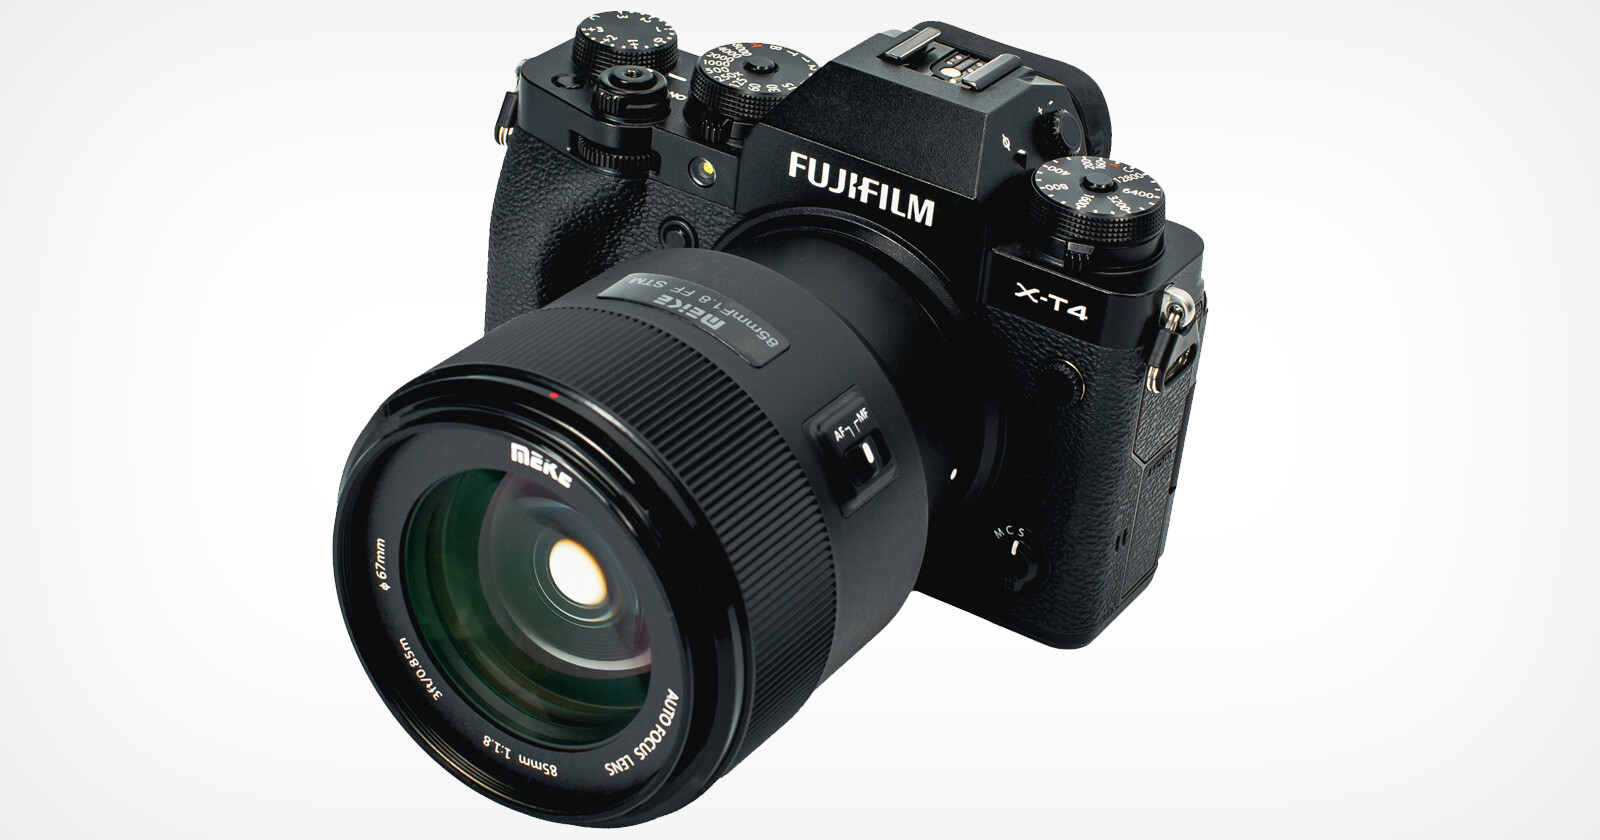 Meikes 85mm f/1.8 Autofocus Lens is Now Available for Fujifilm and Nikon